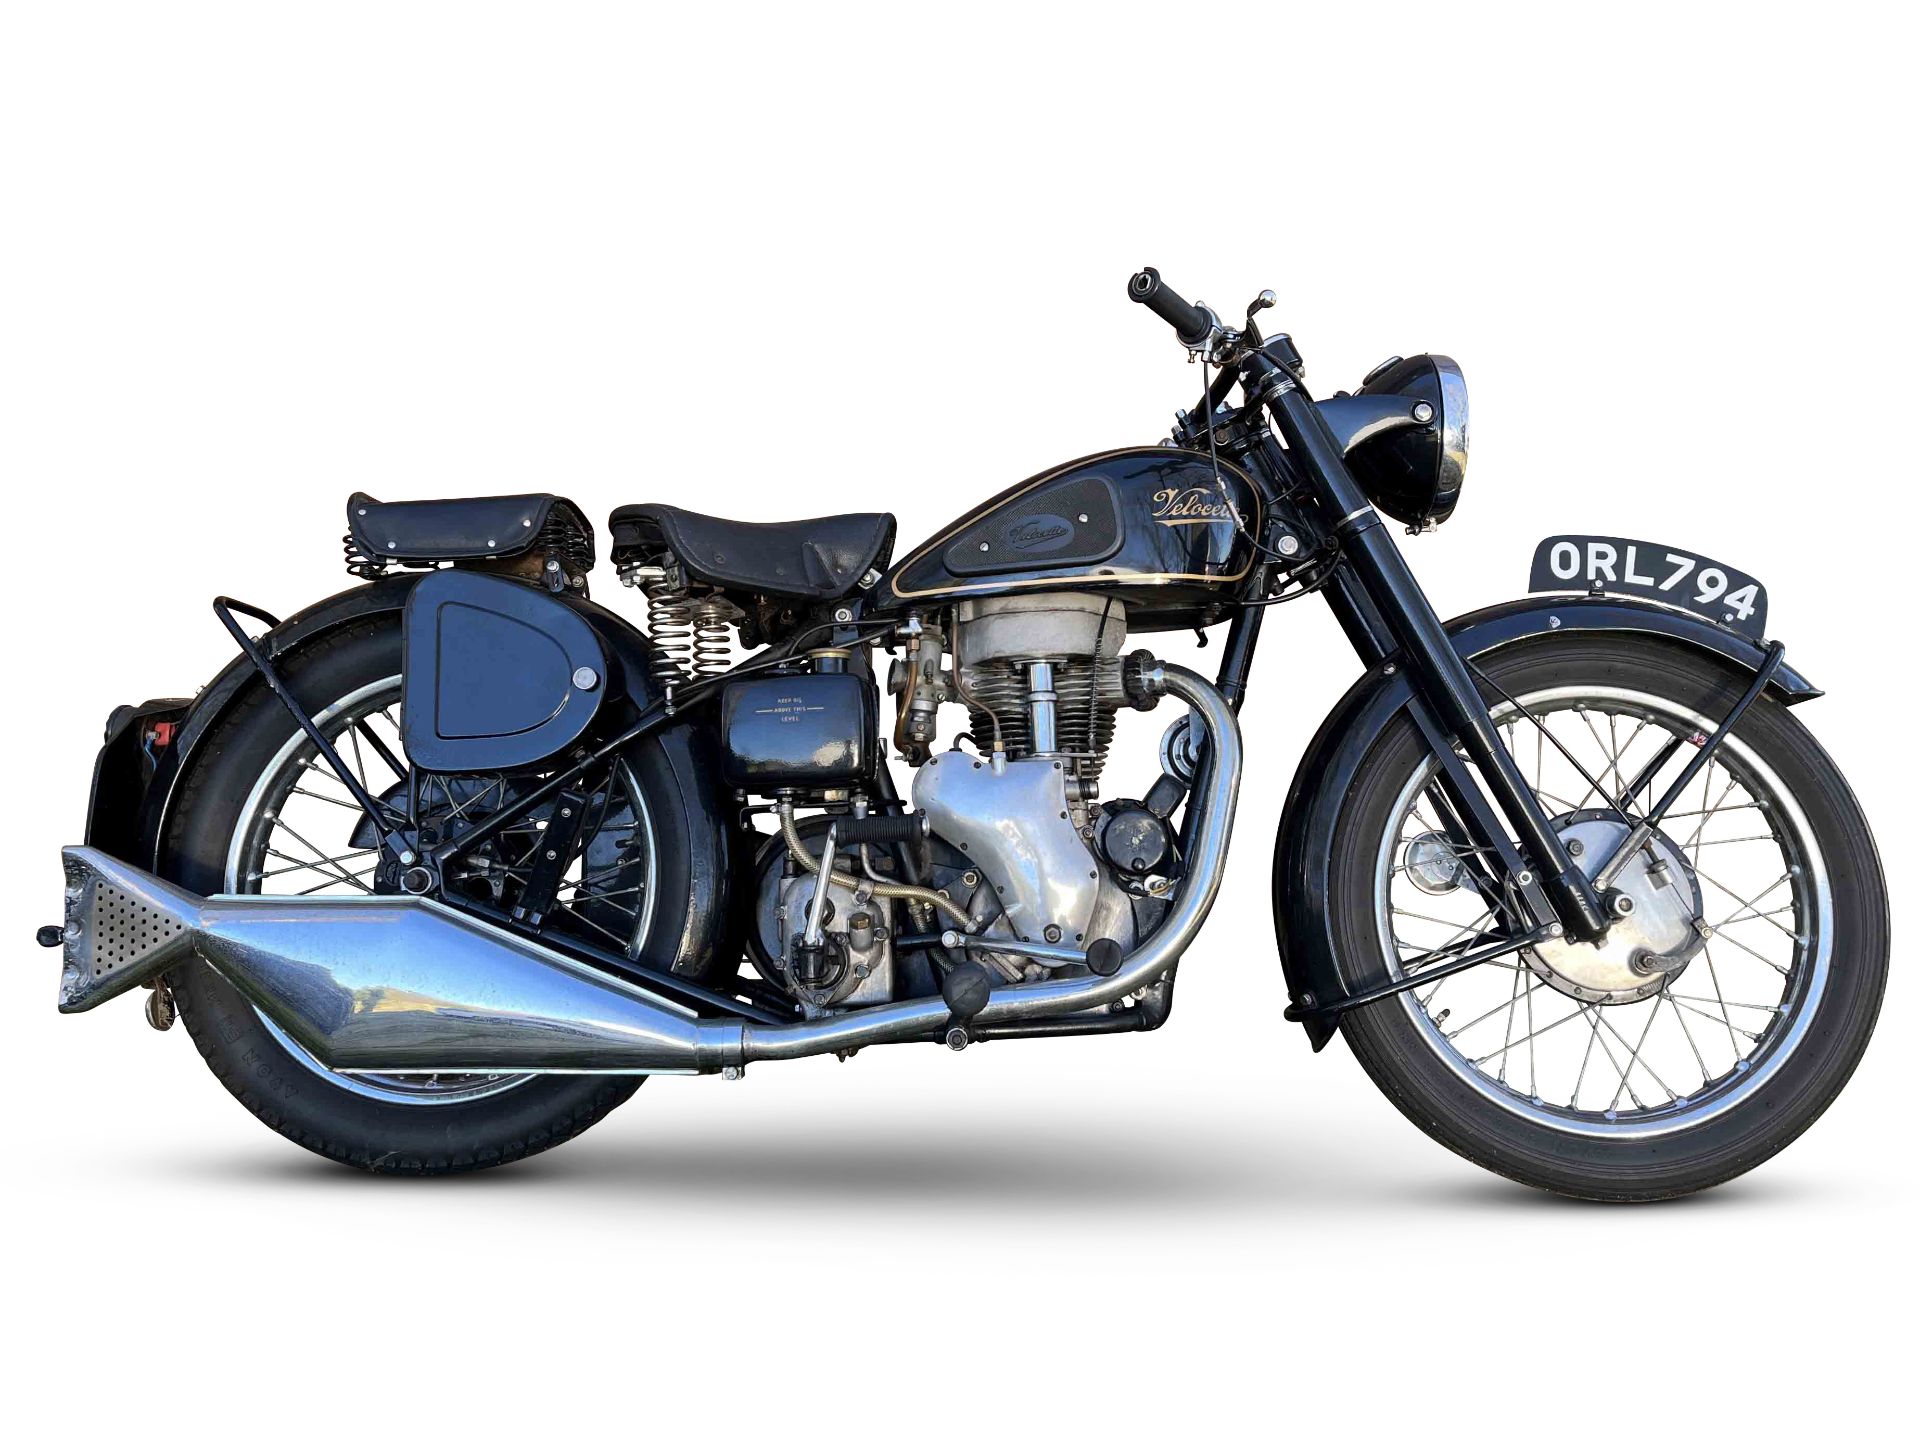 The Clive Wood MBE Collection, 1952 Velocette 348cc MAC Frame no. MS 11541 Engine no. MAC 17989